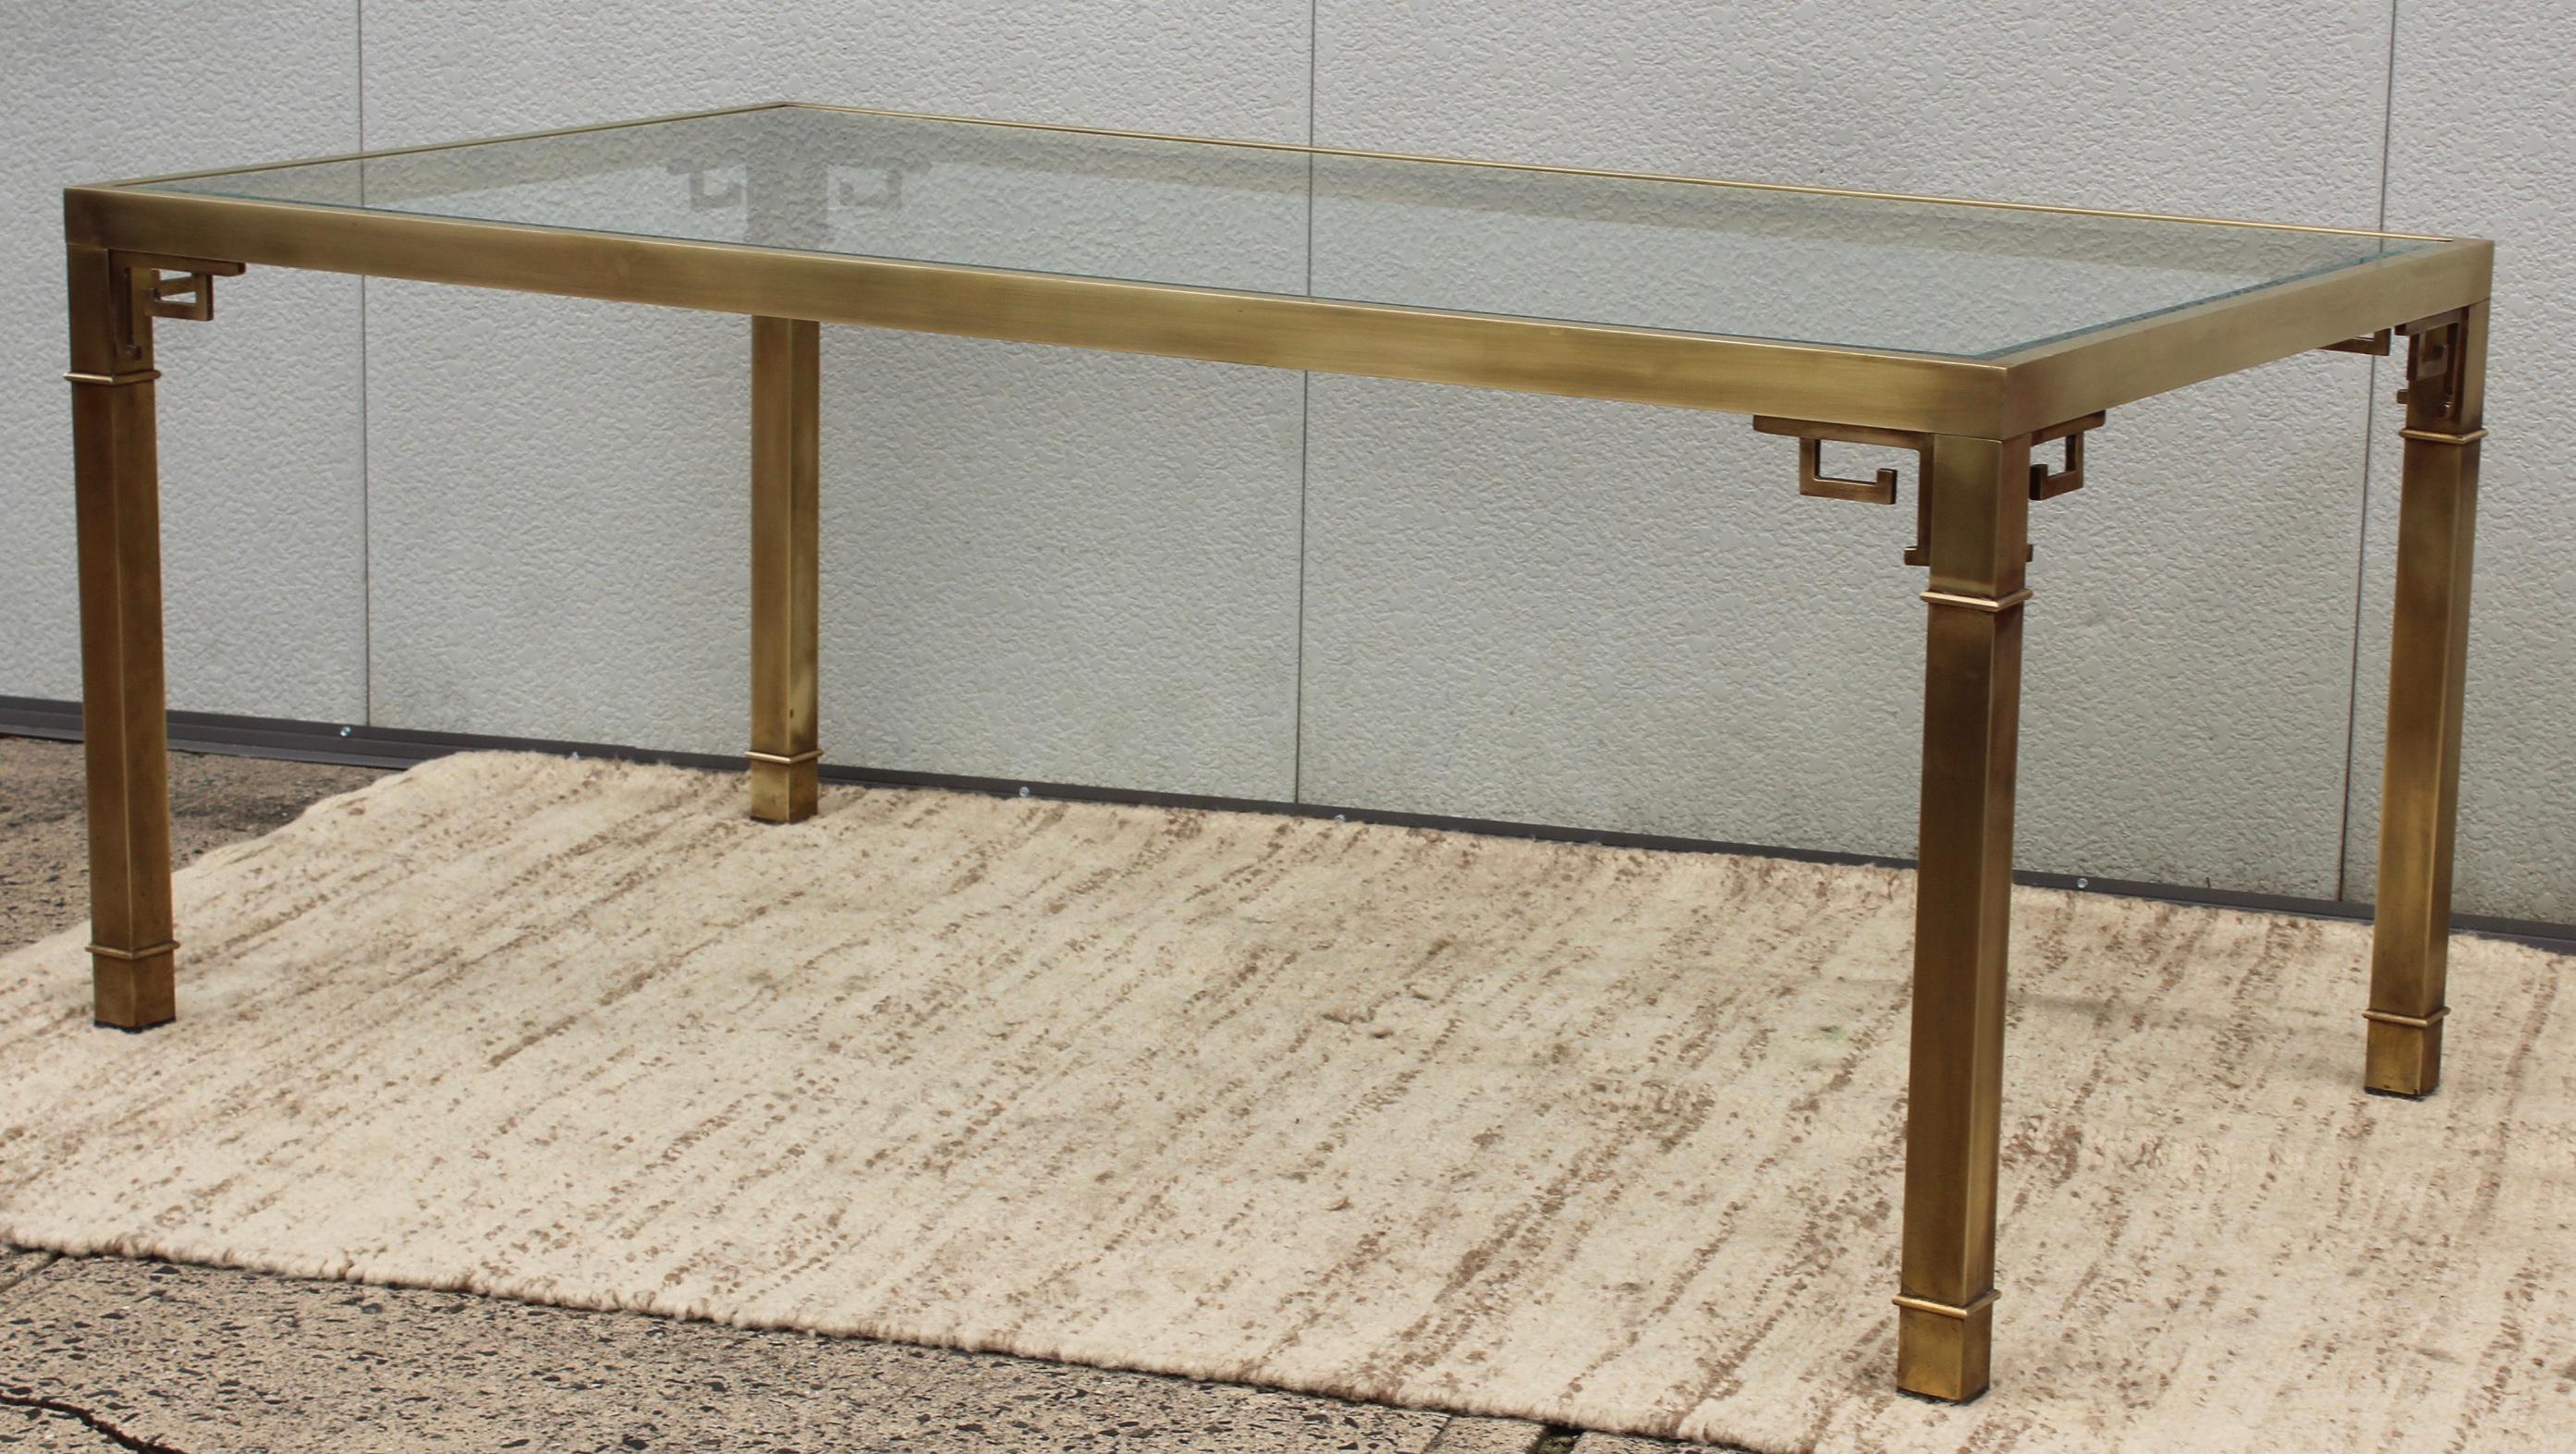 1970's mid-century modern Greek key brass dining table by Mastercraft, in vintage condition with some wear and patina due to age and use, the table has been gently hand polished it shows some wear.